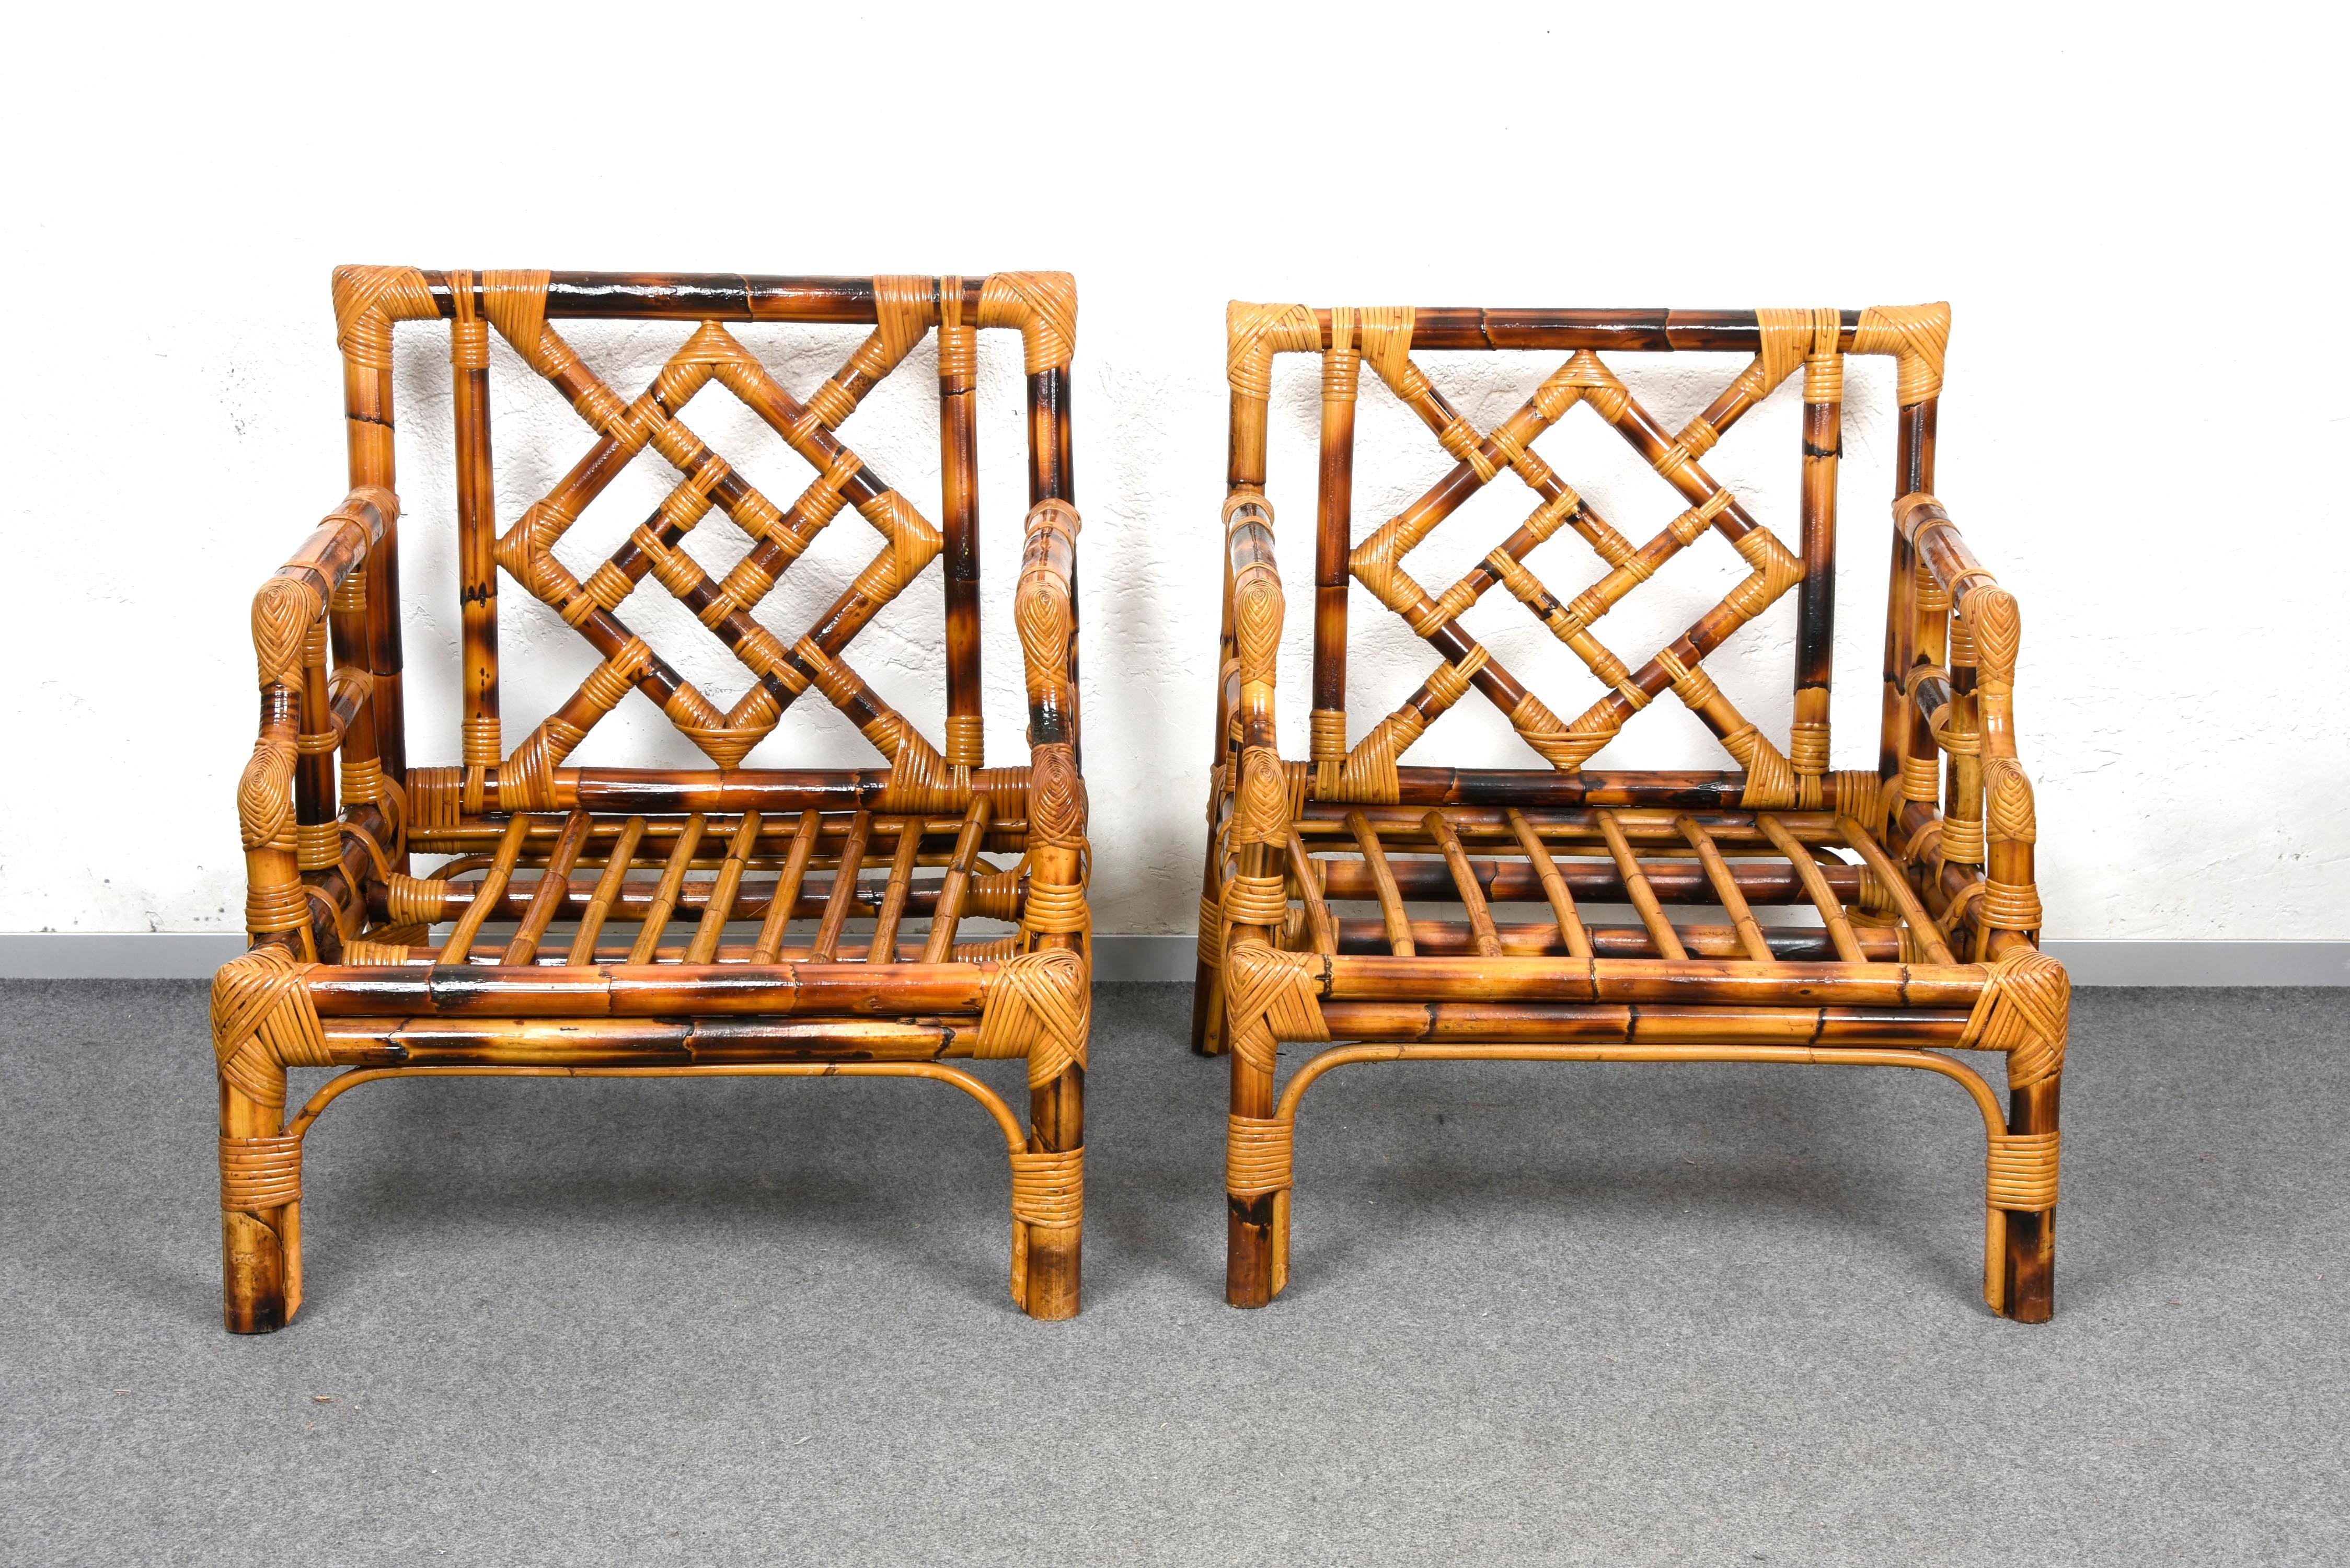 Pair of fantastic Mid-Century Modern bamboo armchairs. This incredible set was produced in Italy by Vivai del Sud during the 1970s.

The beauty of these armchairs is due to the Italian manufacture and handcrafted structure, clearly, they cannot be